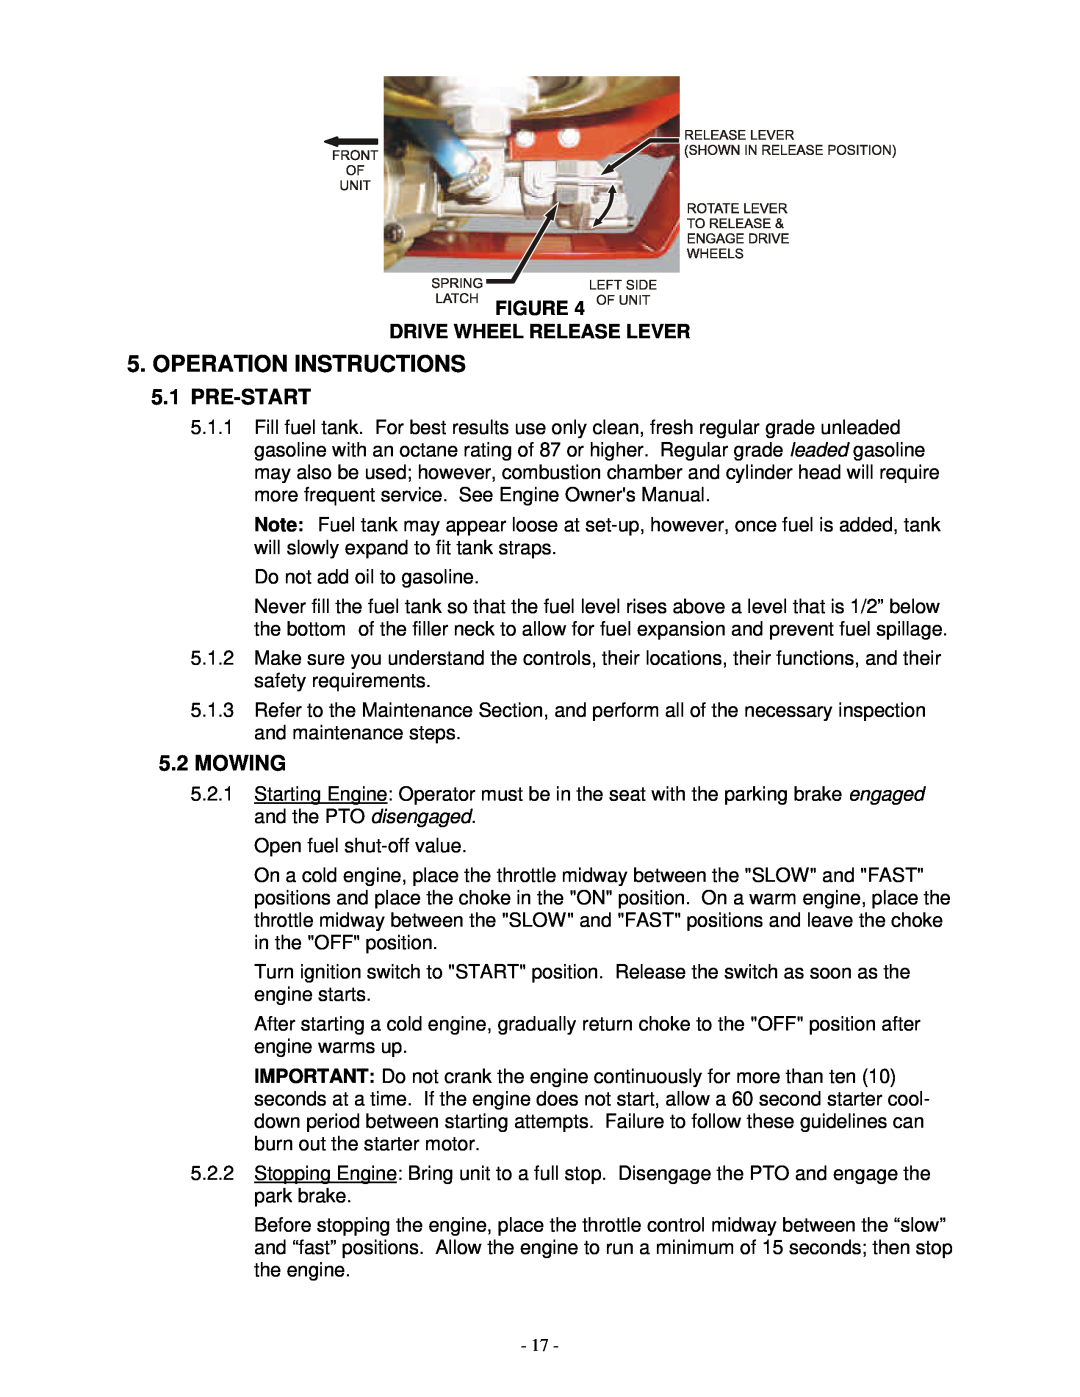 Exmark FMD 524, FMD 604 manual Operation Instructions, Pre-Start, Mowing, Drive Wheel Release Lever 